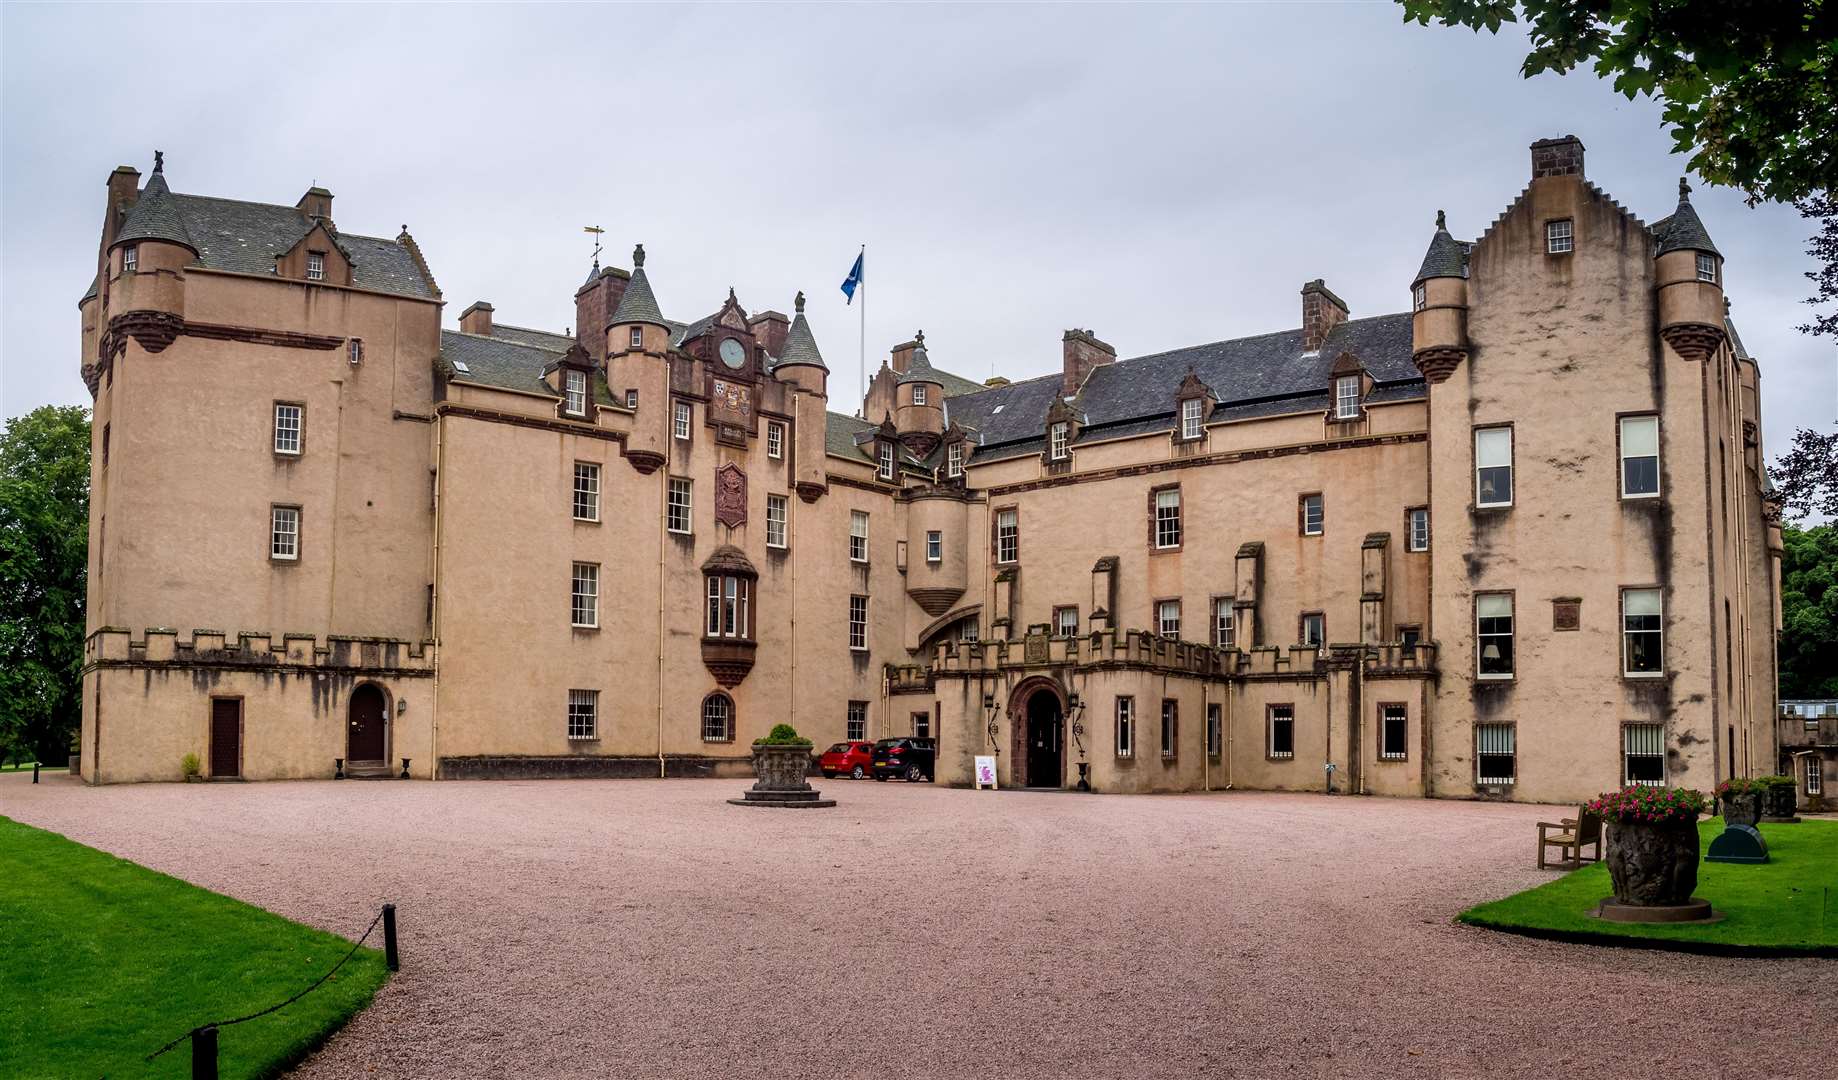 Fyvie Castle grounds and garden are set to reopen.